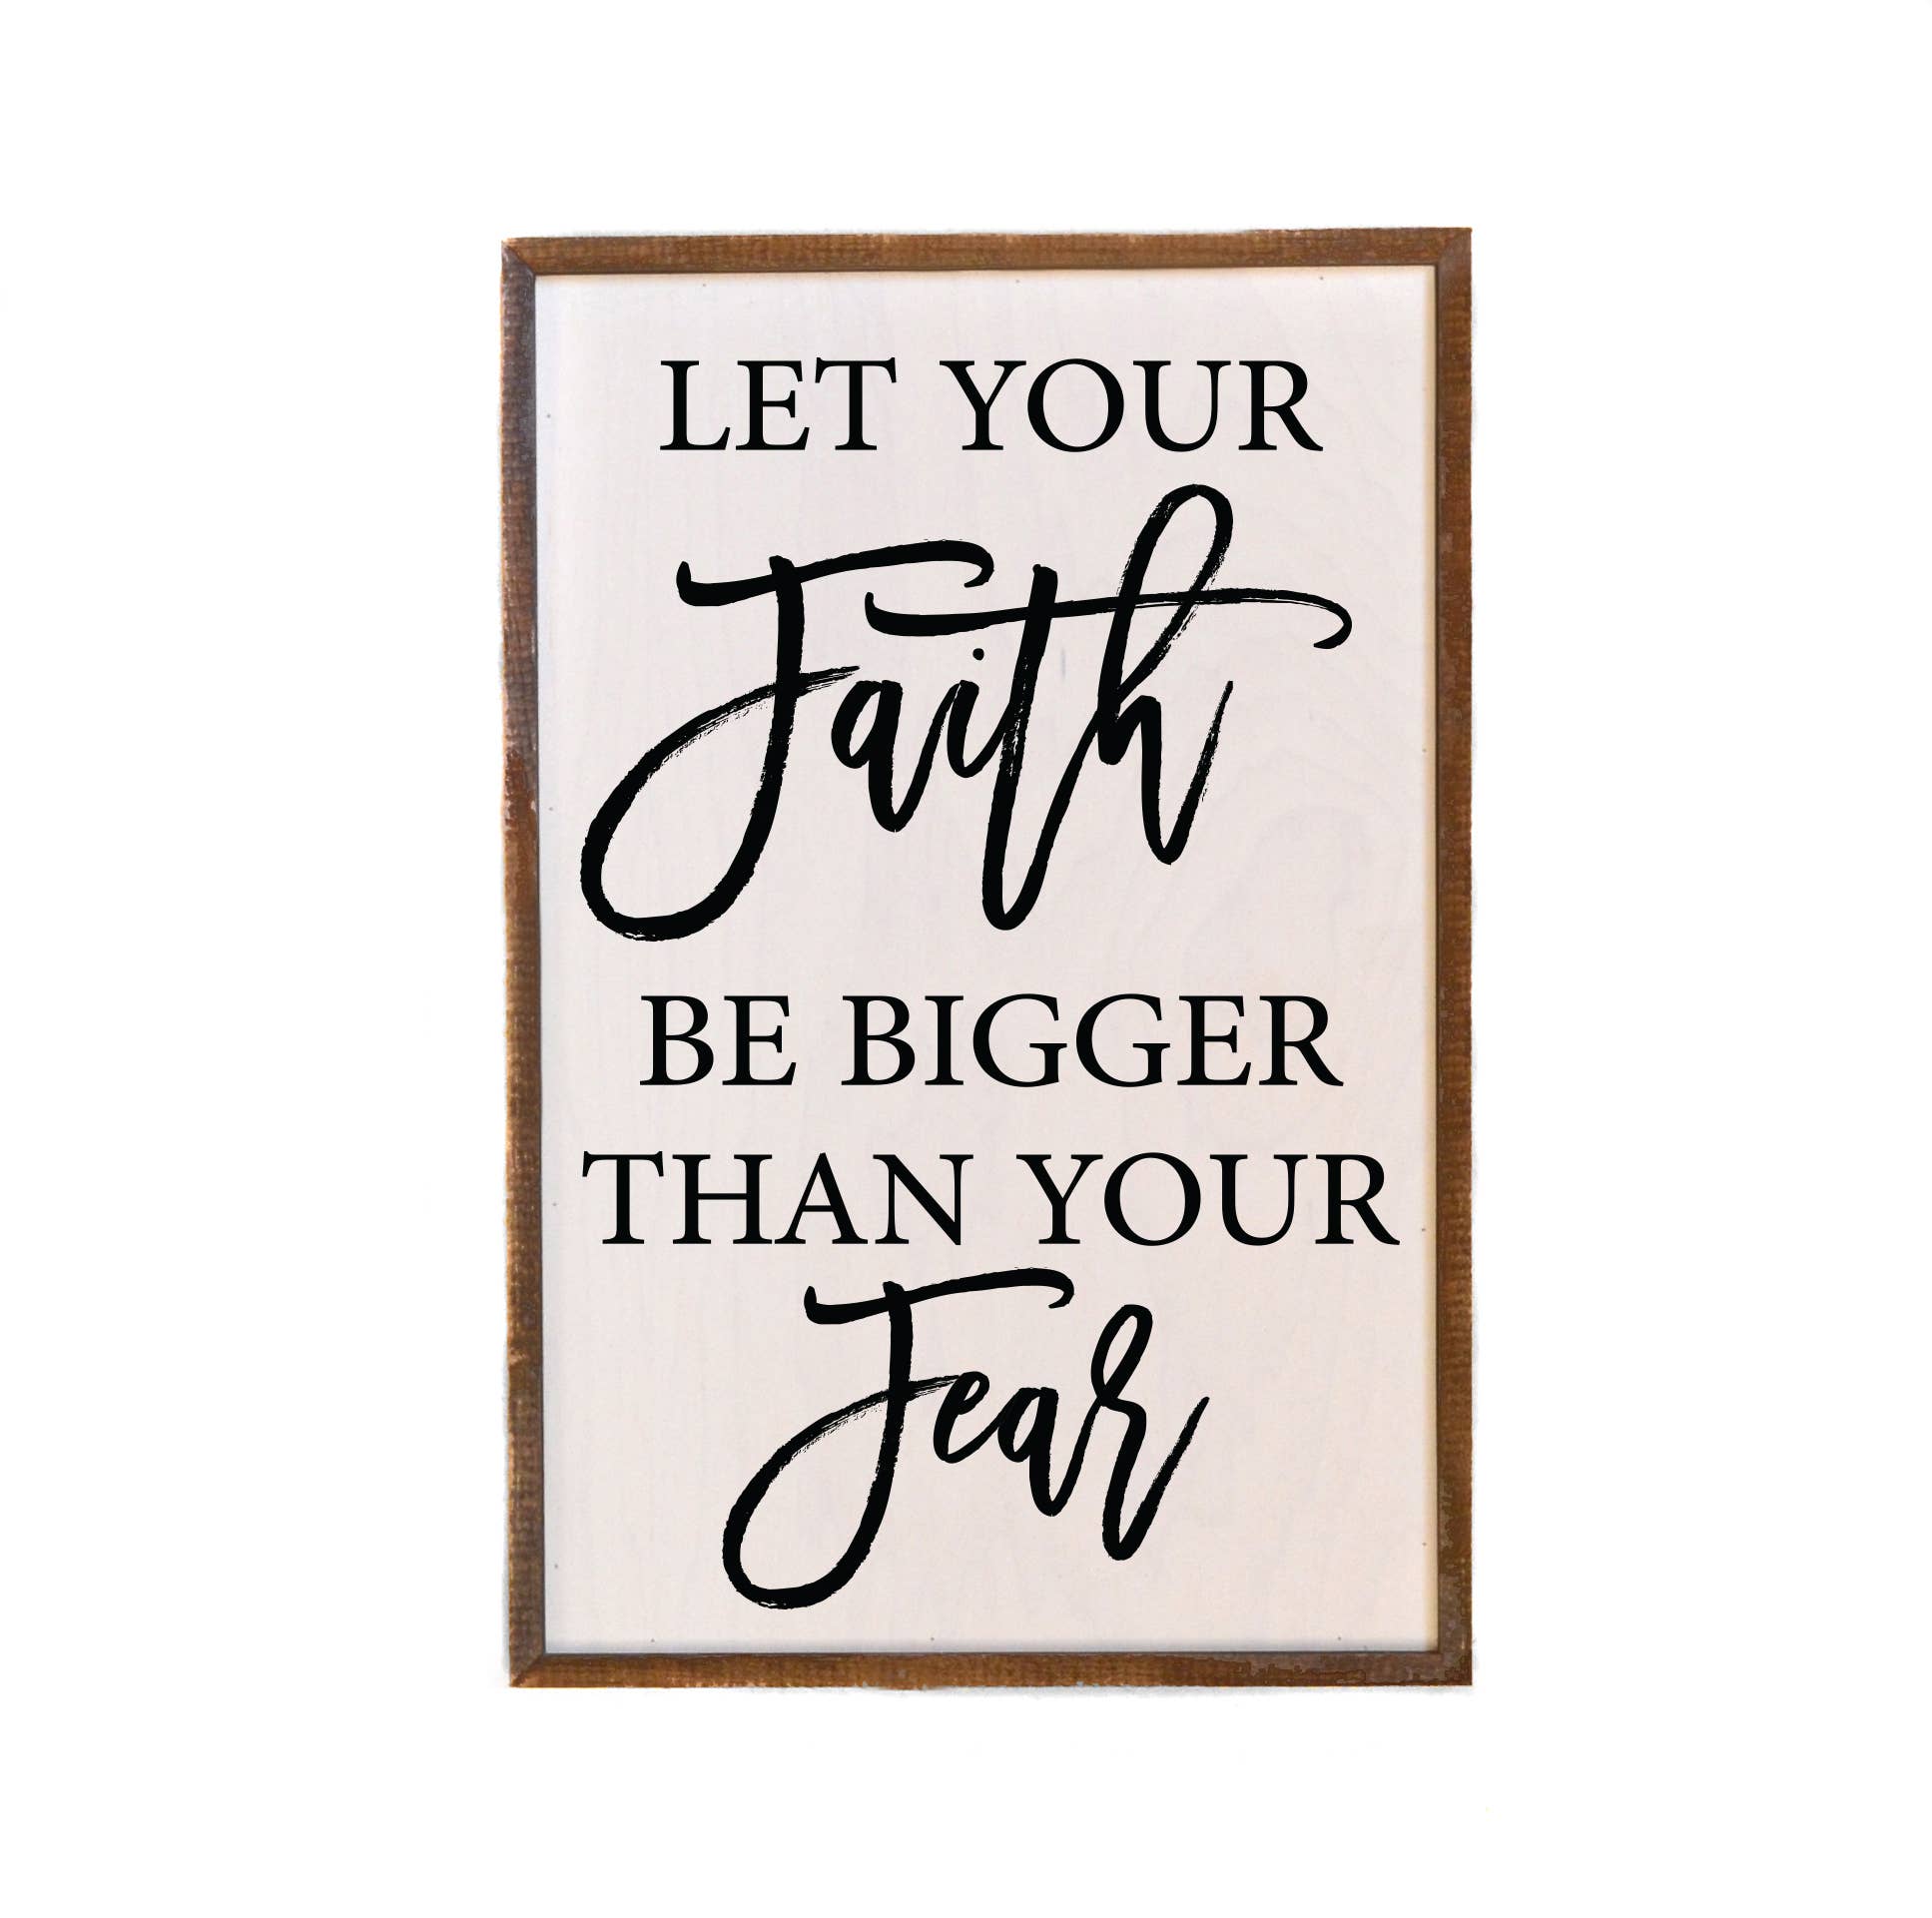 Let Your Faith Be Bigger Than Your Fear Wall Sign (12x18) | 2FruitBearers